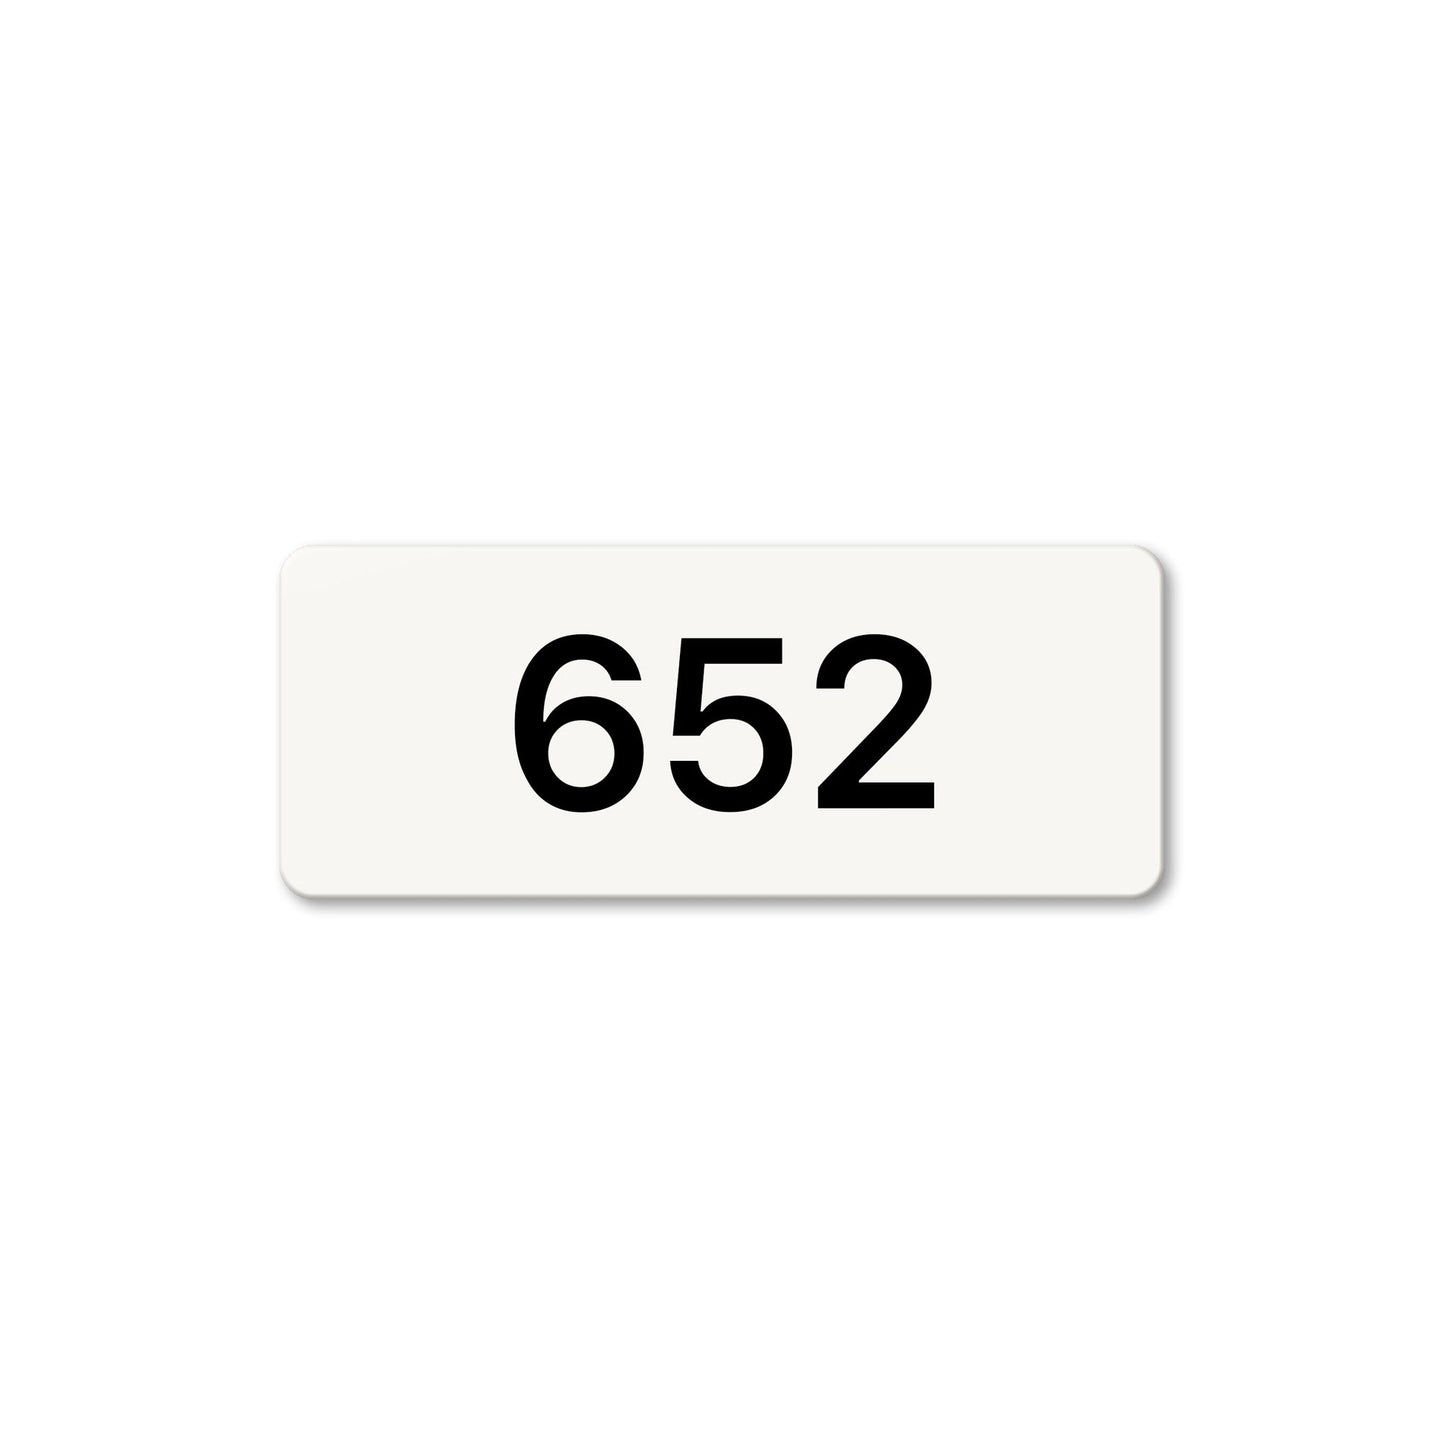 Numeral 652